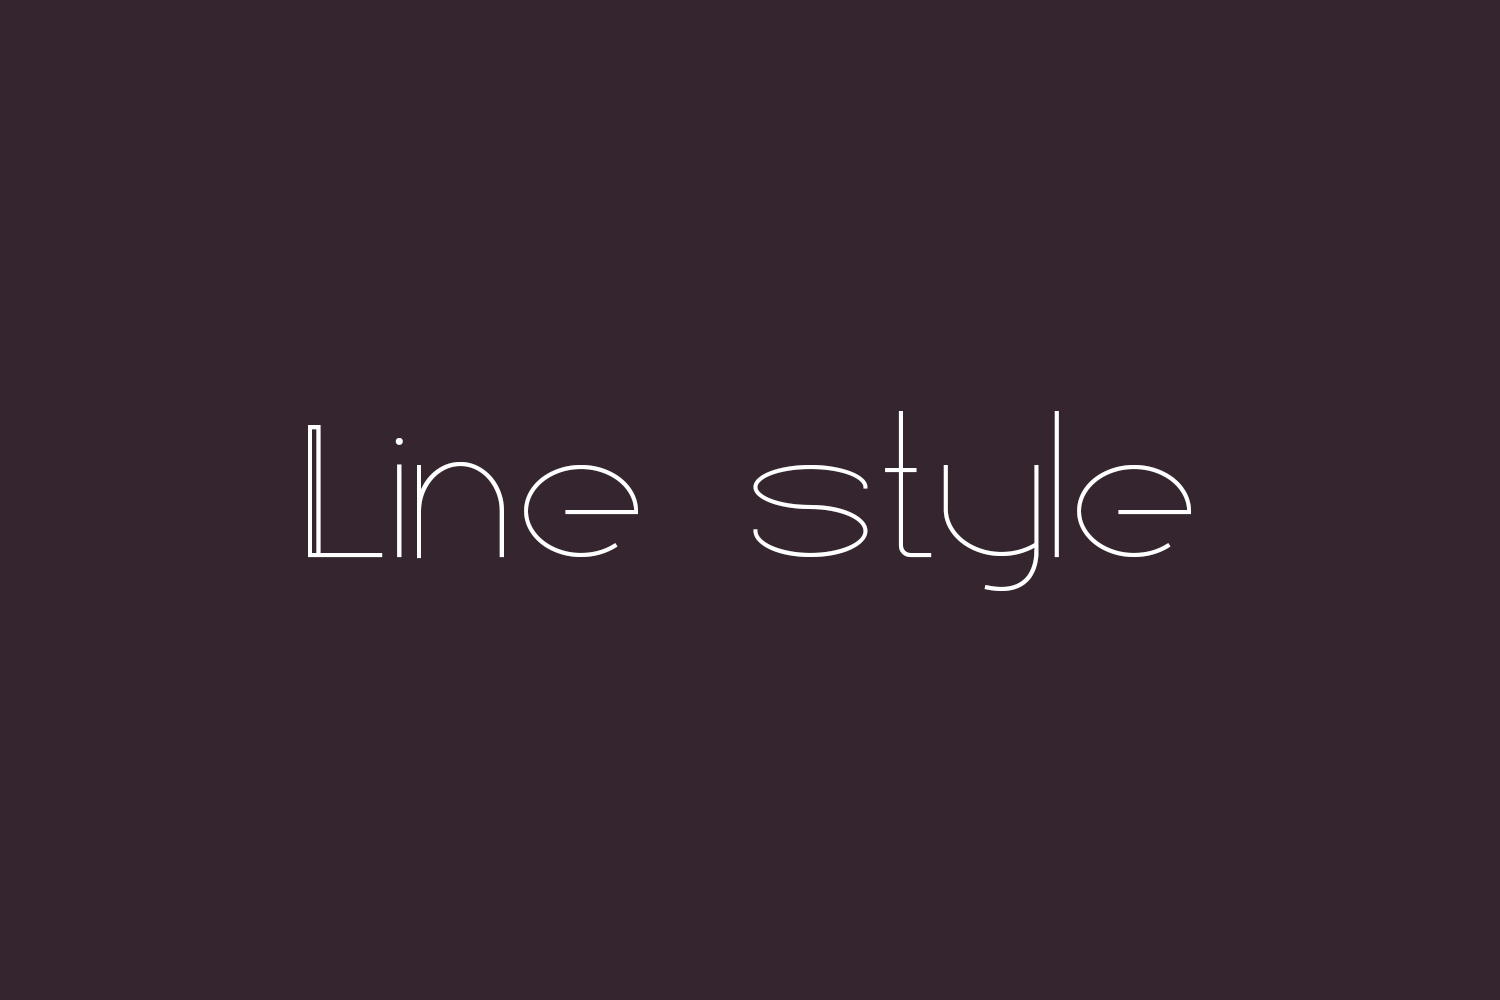 Line style Free Font